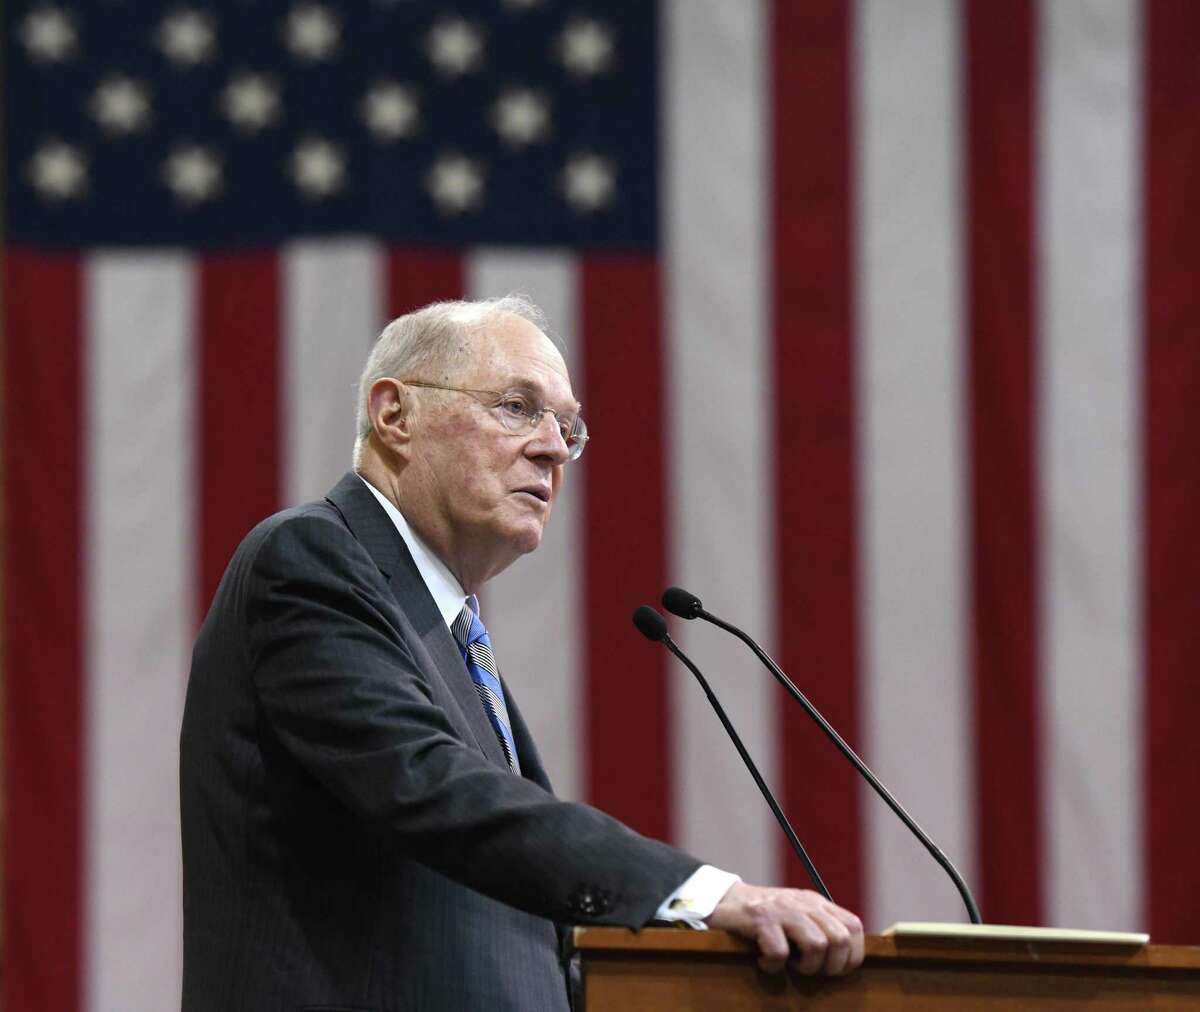 Retired United States Supreme Court Associate Justice Anthony Kennedy speaks at the Brunswick School 117th Commencement at Brunswick's School's Dann Gymnasium in Greenwich, Conn. Wednesday, May 22, 2019. Retired Supreme Court Associate Justice Anthony M. Kennedy gave the commencement speech before 100 new graduates walked across the stage.